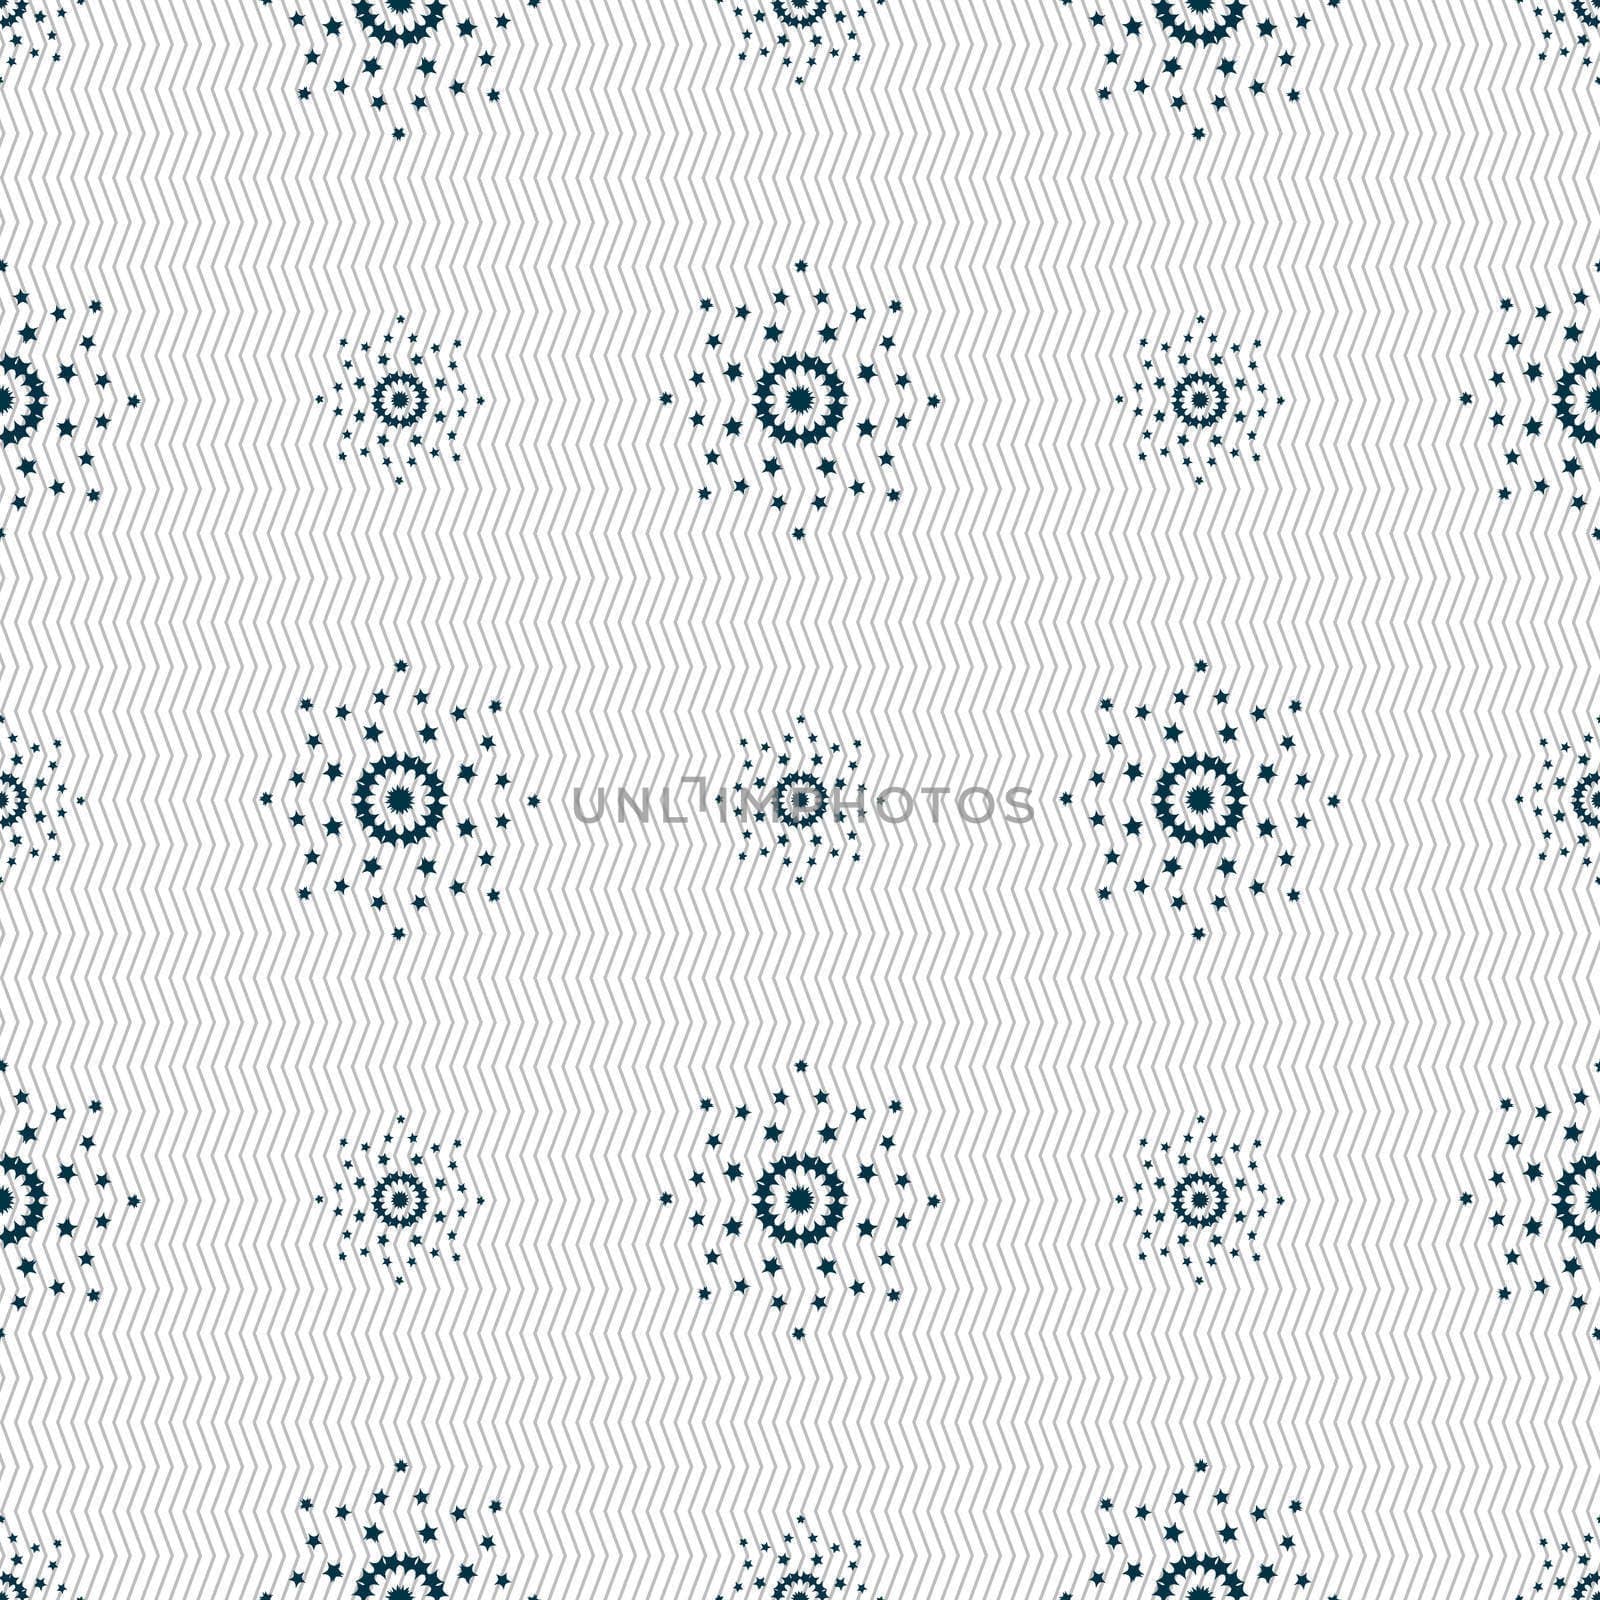 Cursor, arrow plus, add icon sign. Seamless abstract background with geometric shapes.  by serhii_lohvyniuk